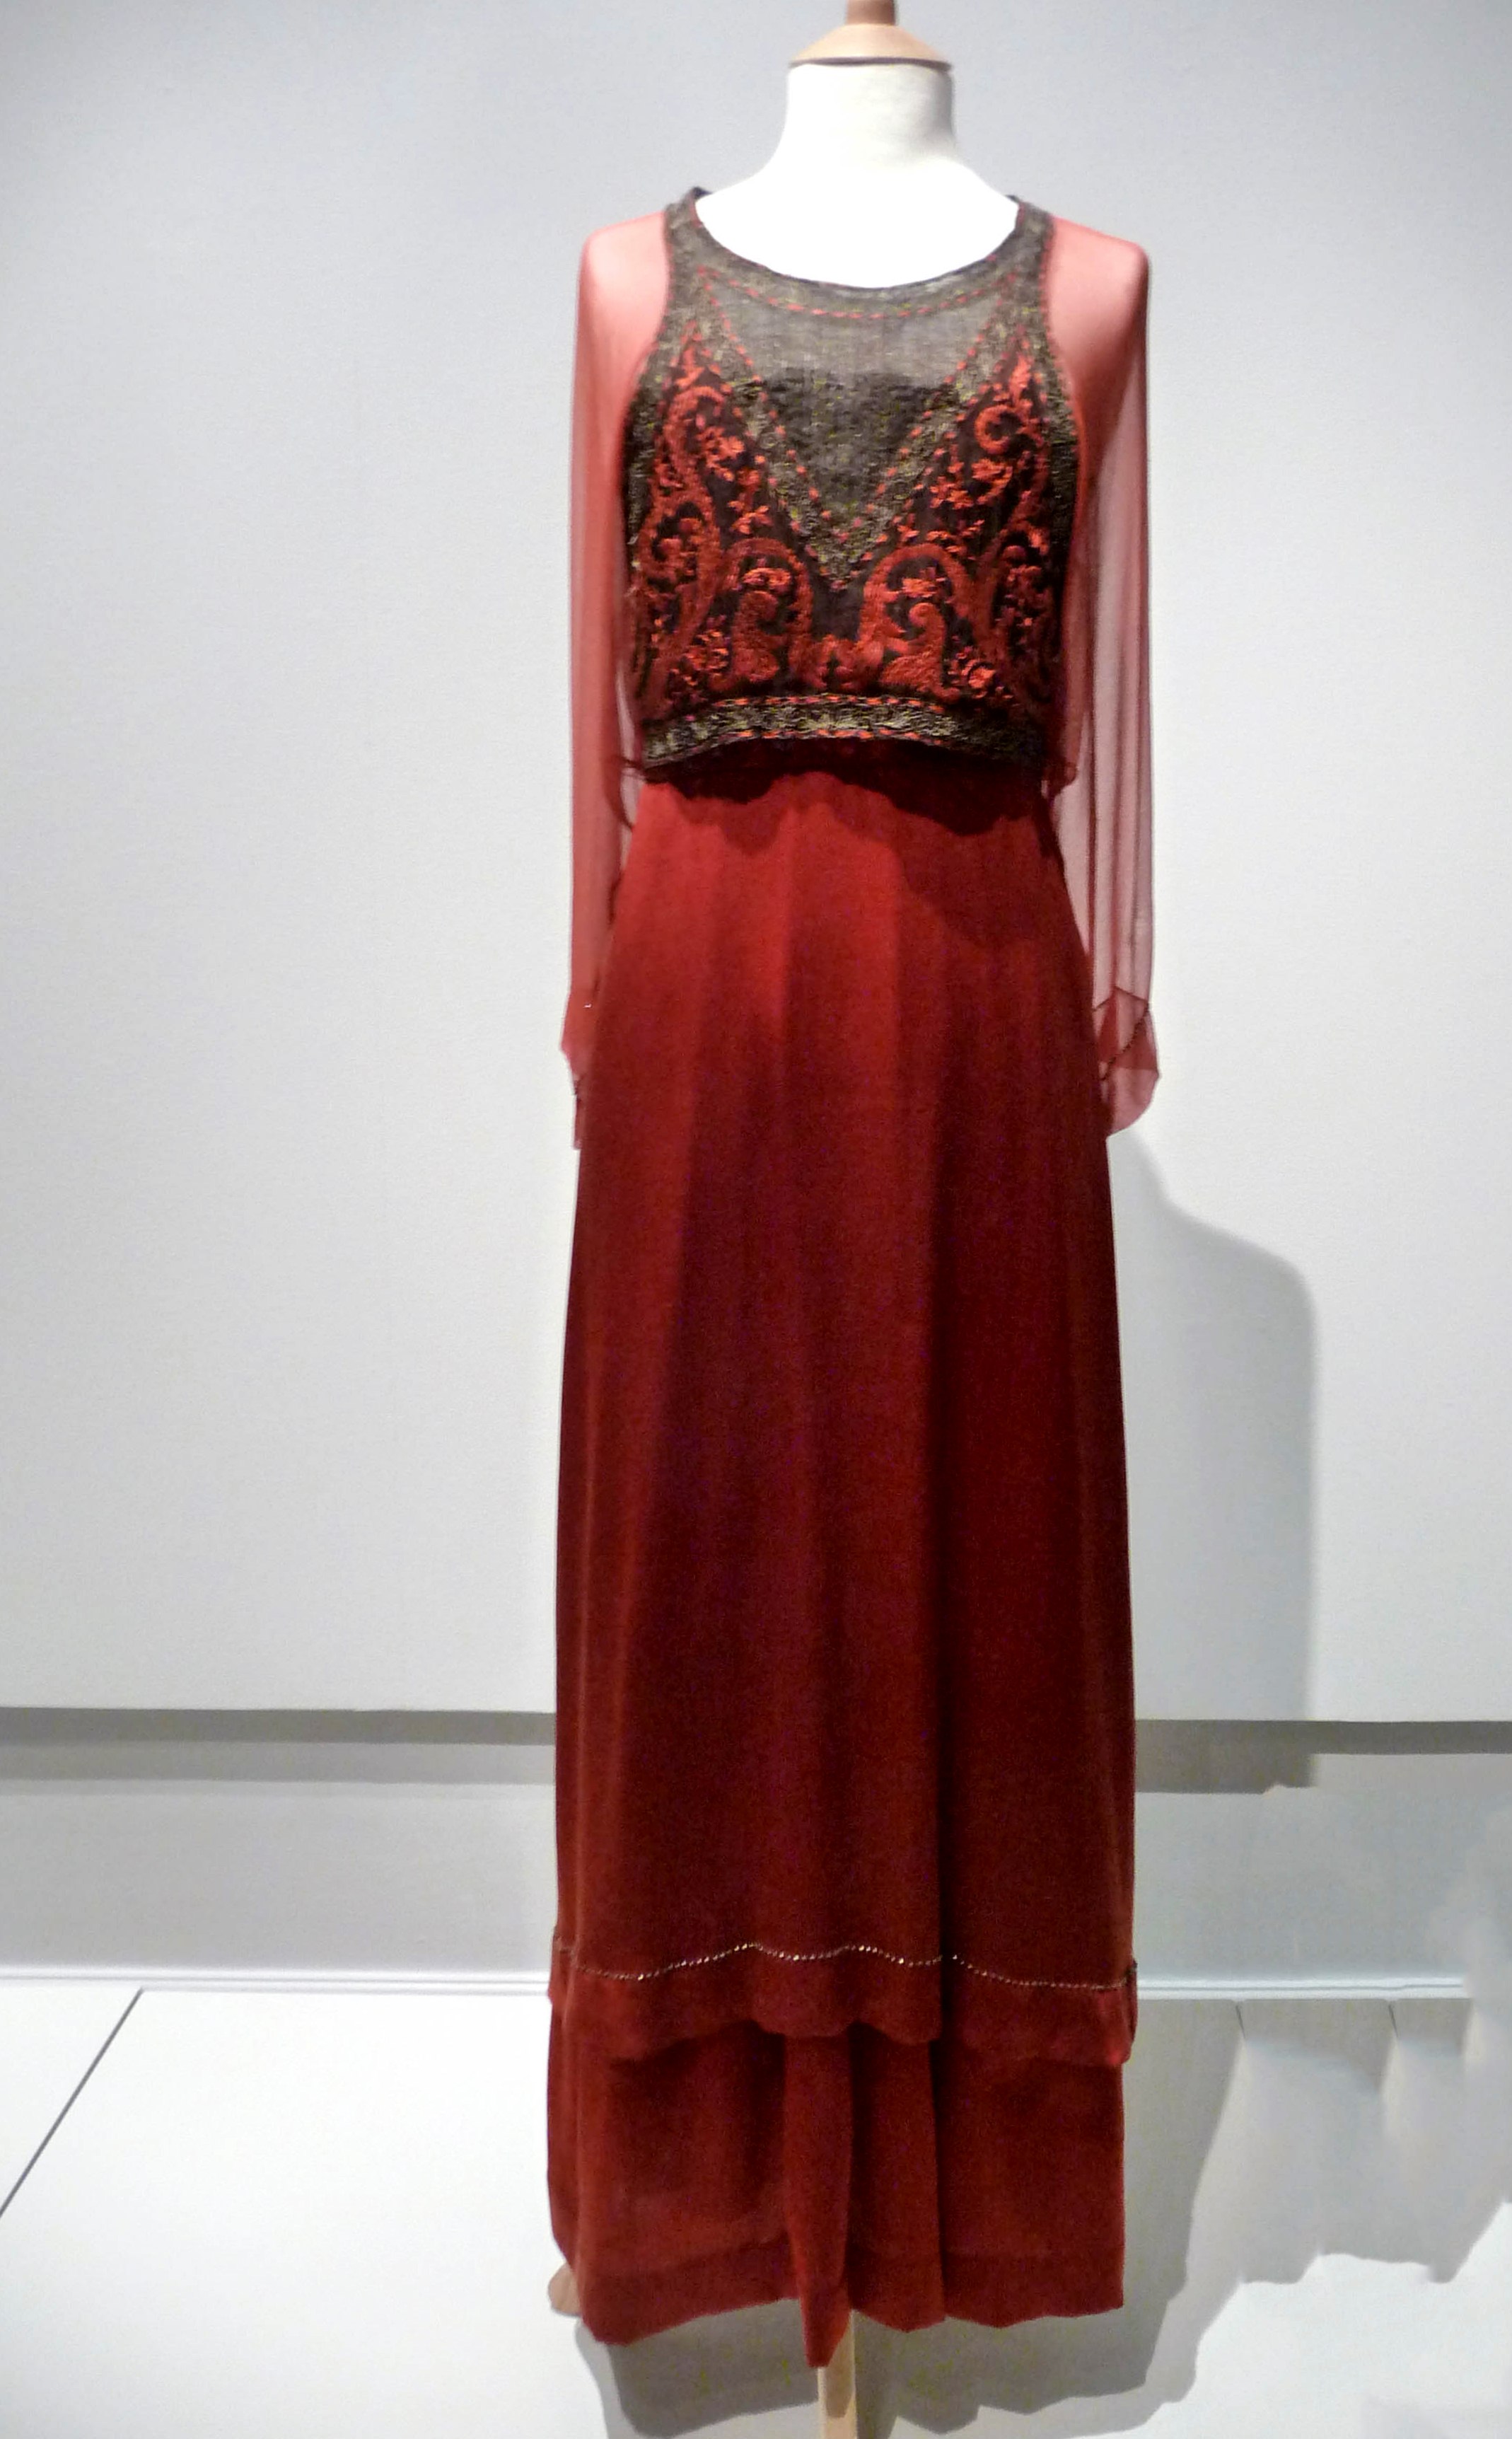 EVENING GOWN, silk and silk chiffon, with applied silk folk motifs, made by Cosprop, 2010. Worn by Michelle Dockery as Lady Mary Crawley in Downton Abbey.